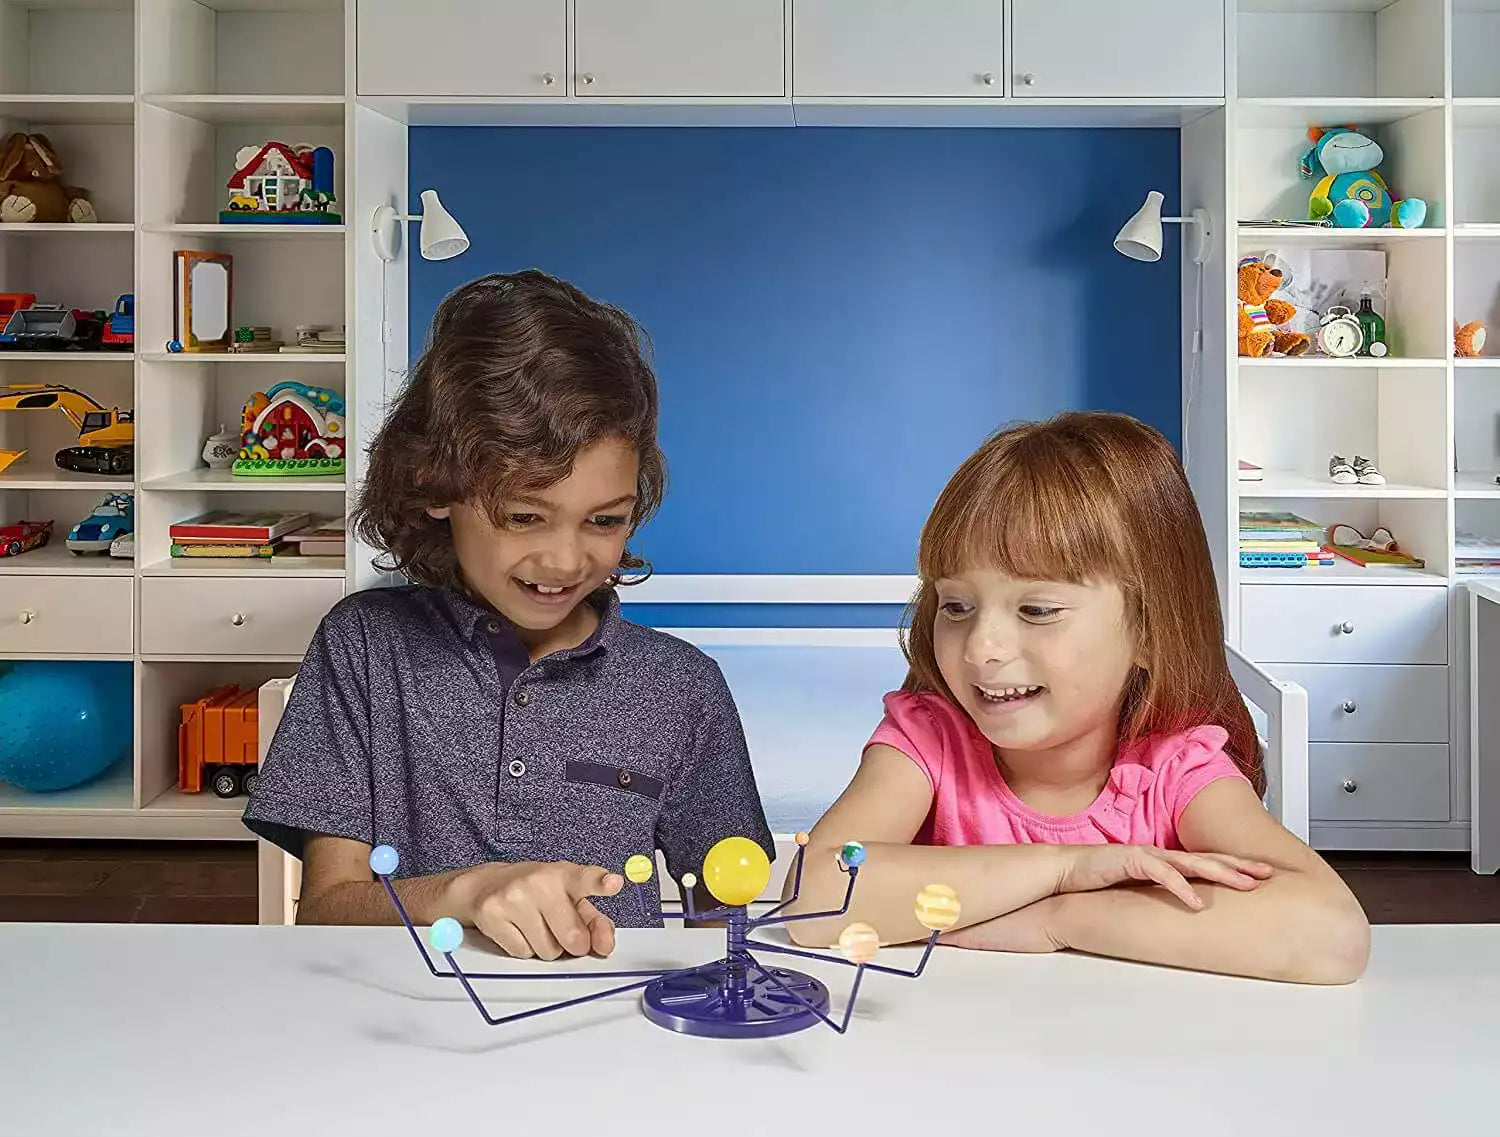 solar system toys - brainstorm toys - learning through playing with science toys at The Toy Room